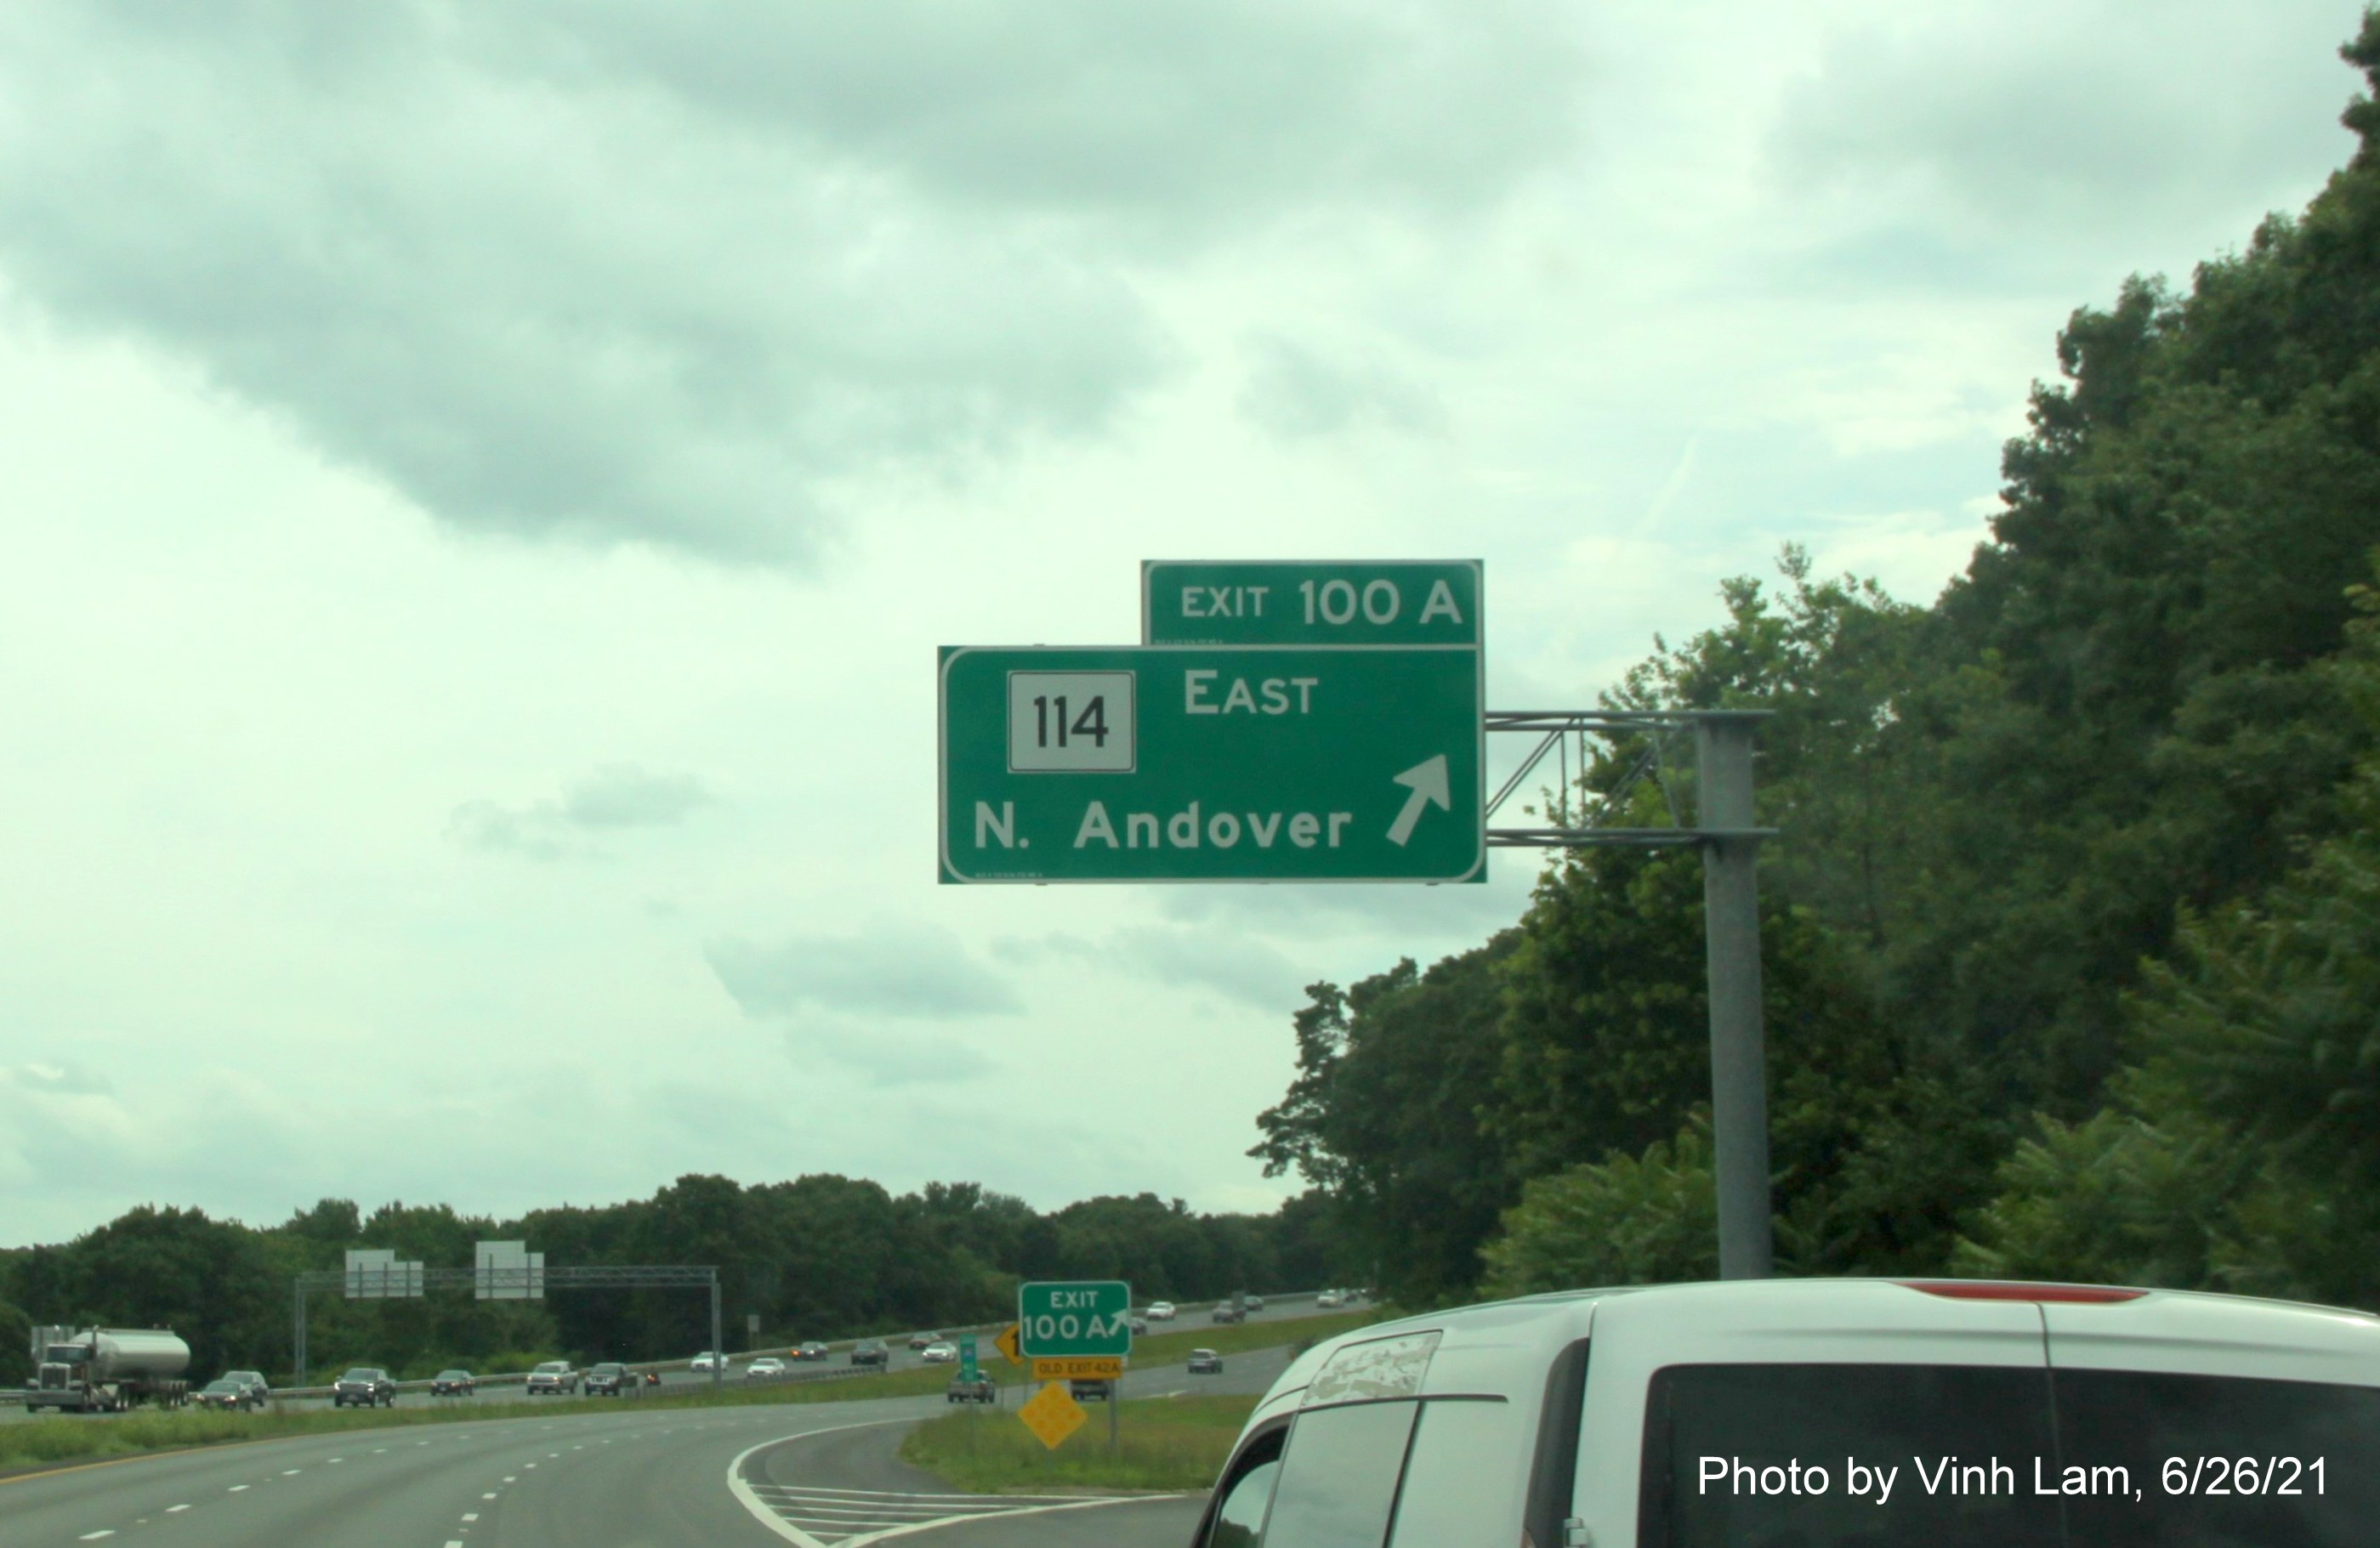 Image of overhead ramp sign for MA 114 East exit with new milepost exit number on I-495 South in North Andover, by Vinh Lam, June 2021